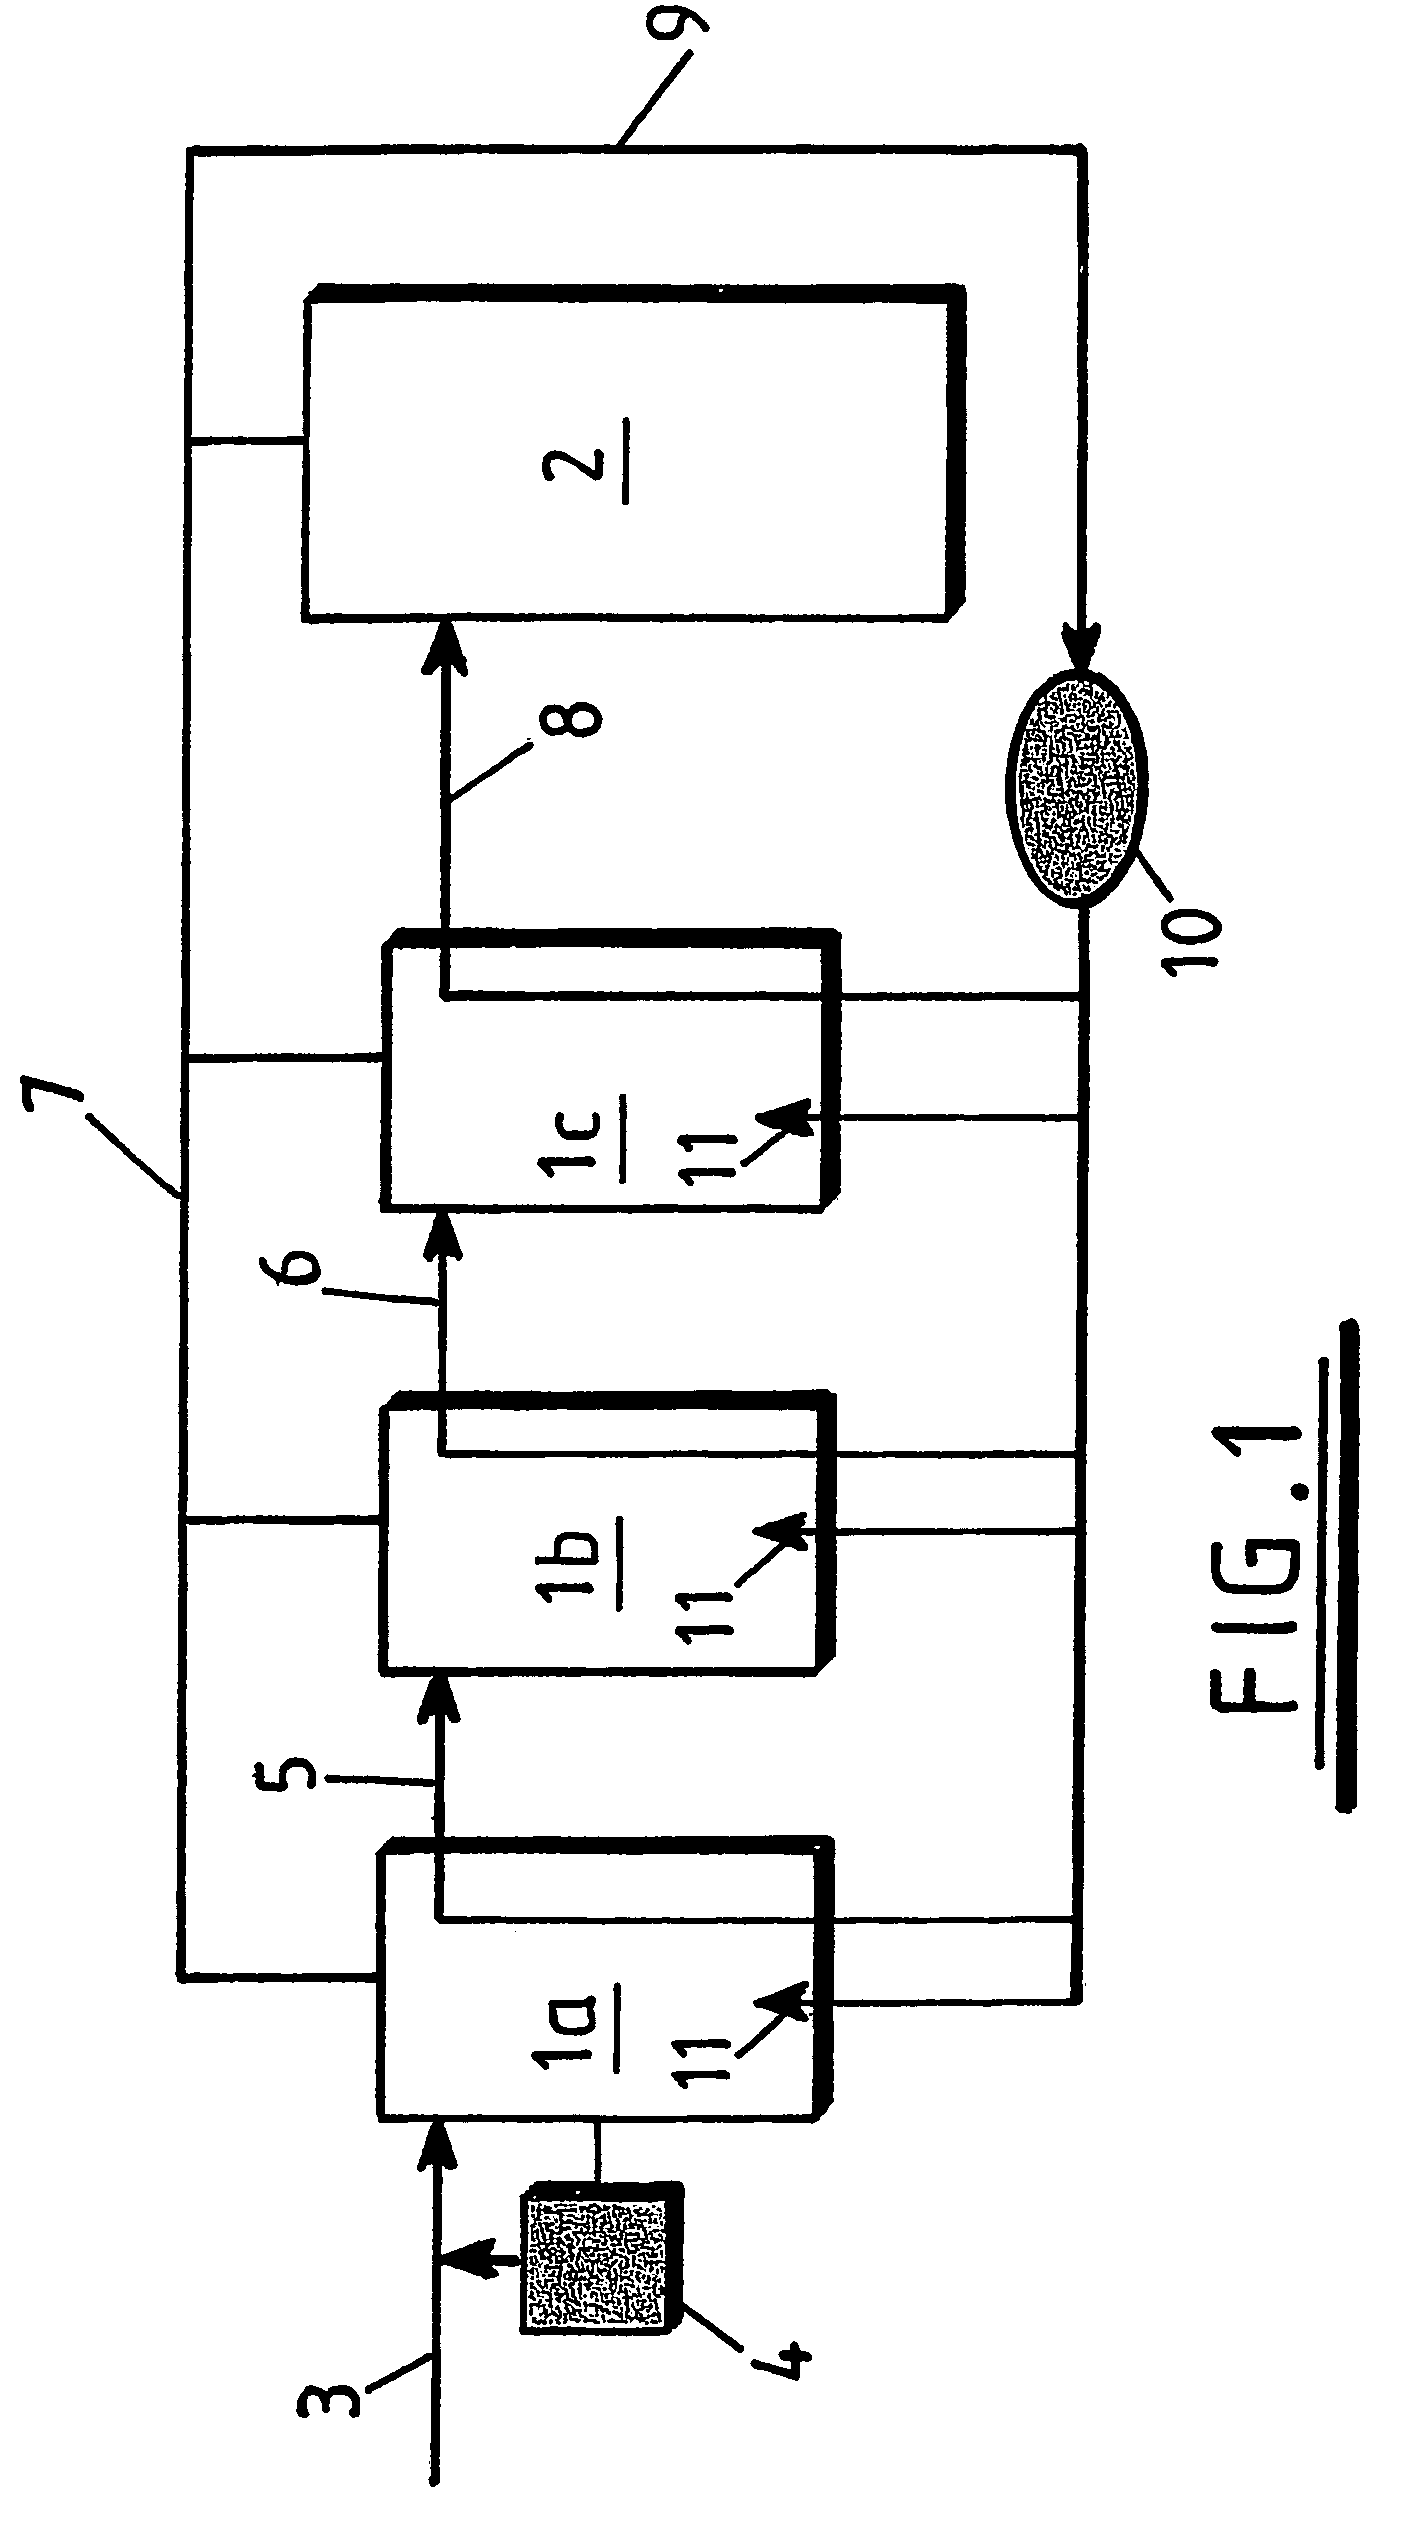 Incubation treatment of sludge for pathogen reduction prior to digestion